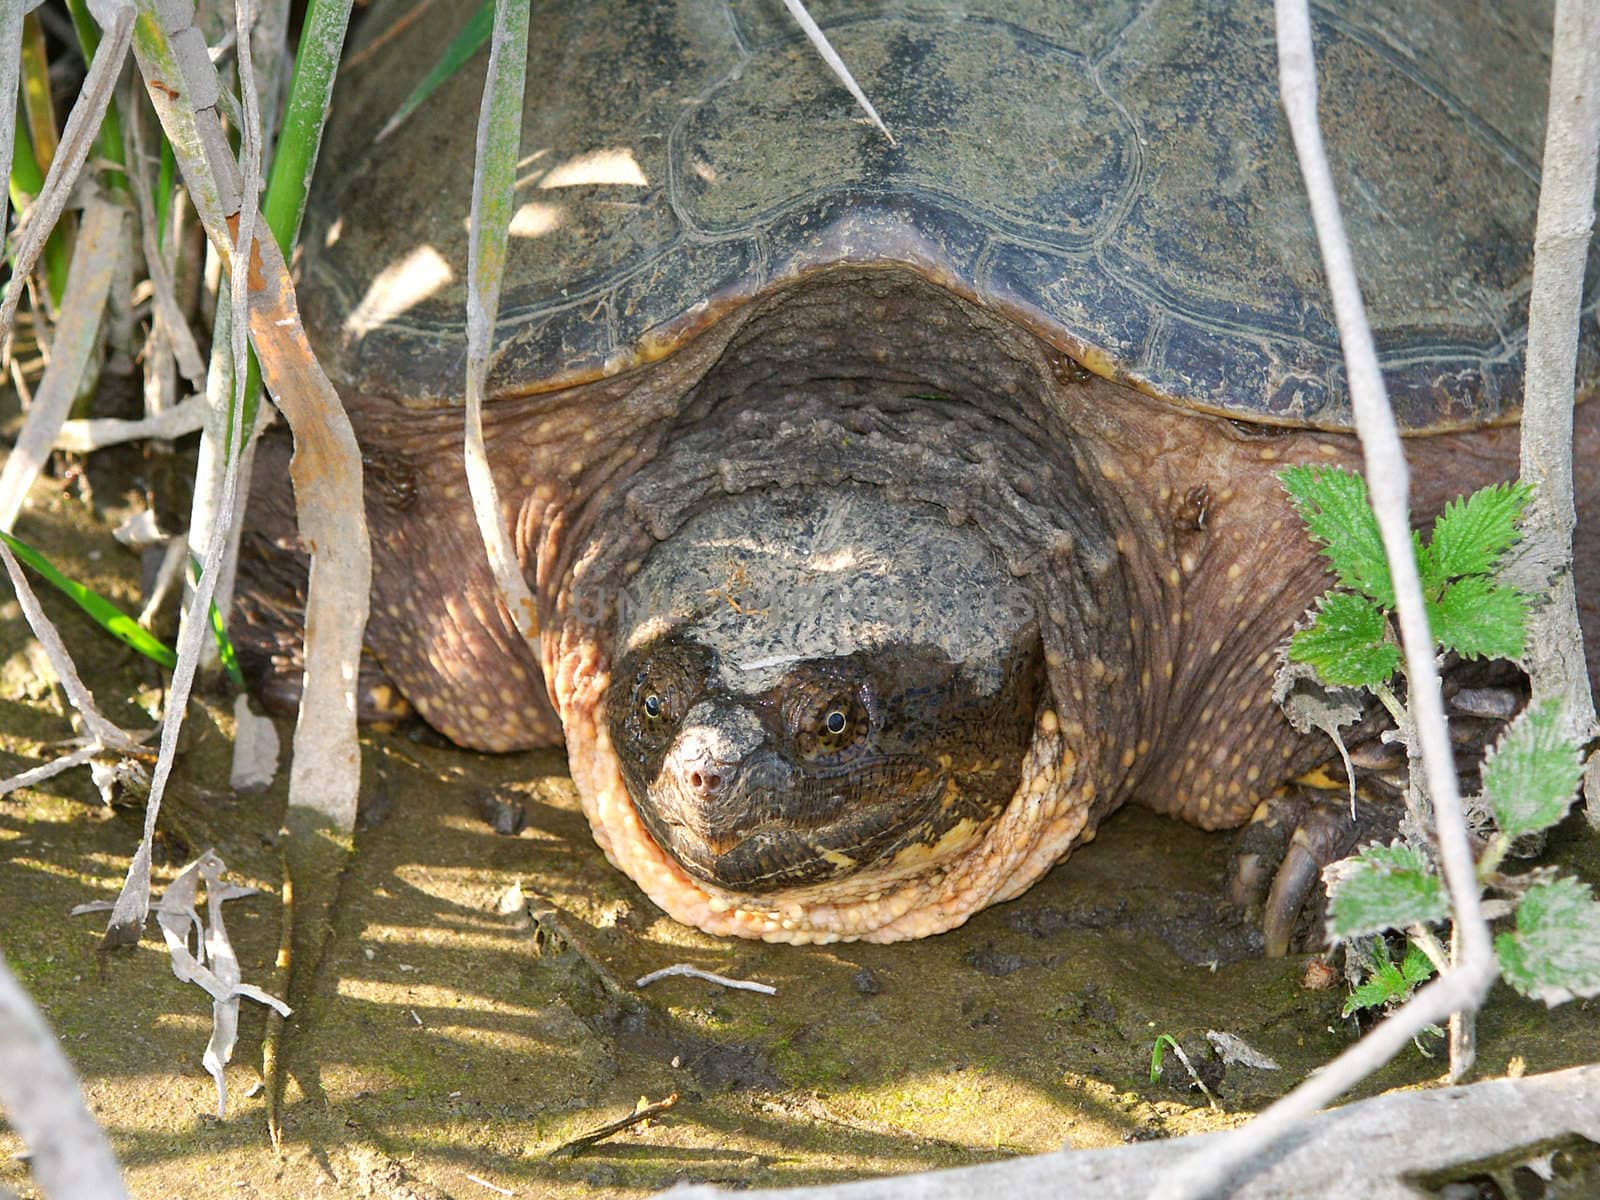 A Snapping Turtle (Chelydra serpentina) at Deer Run Forest Preserve in northern Illinois.